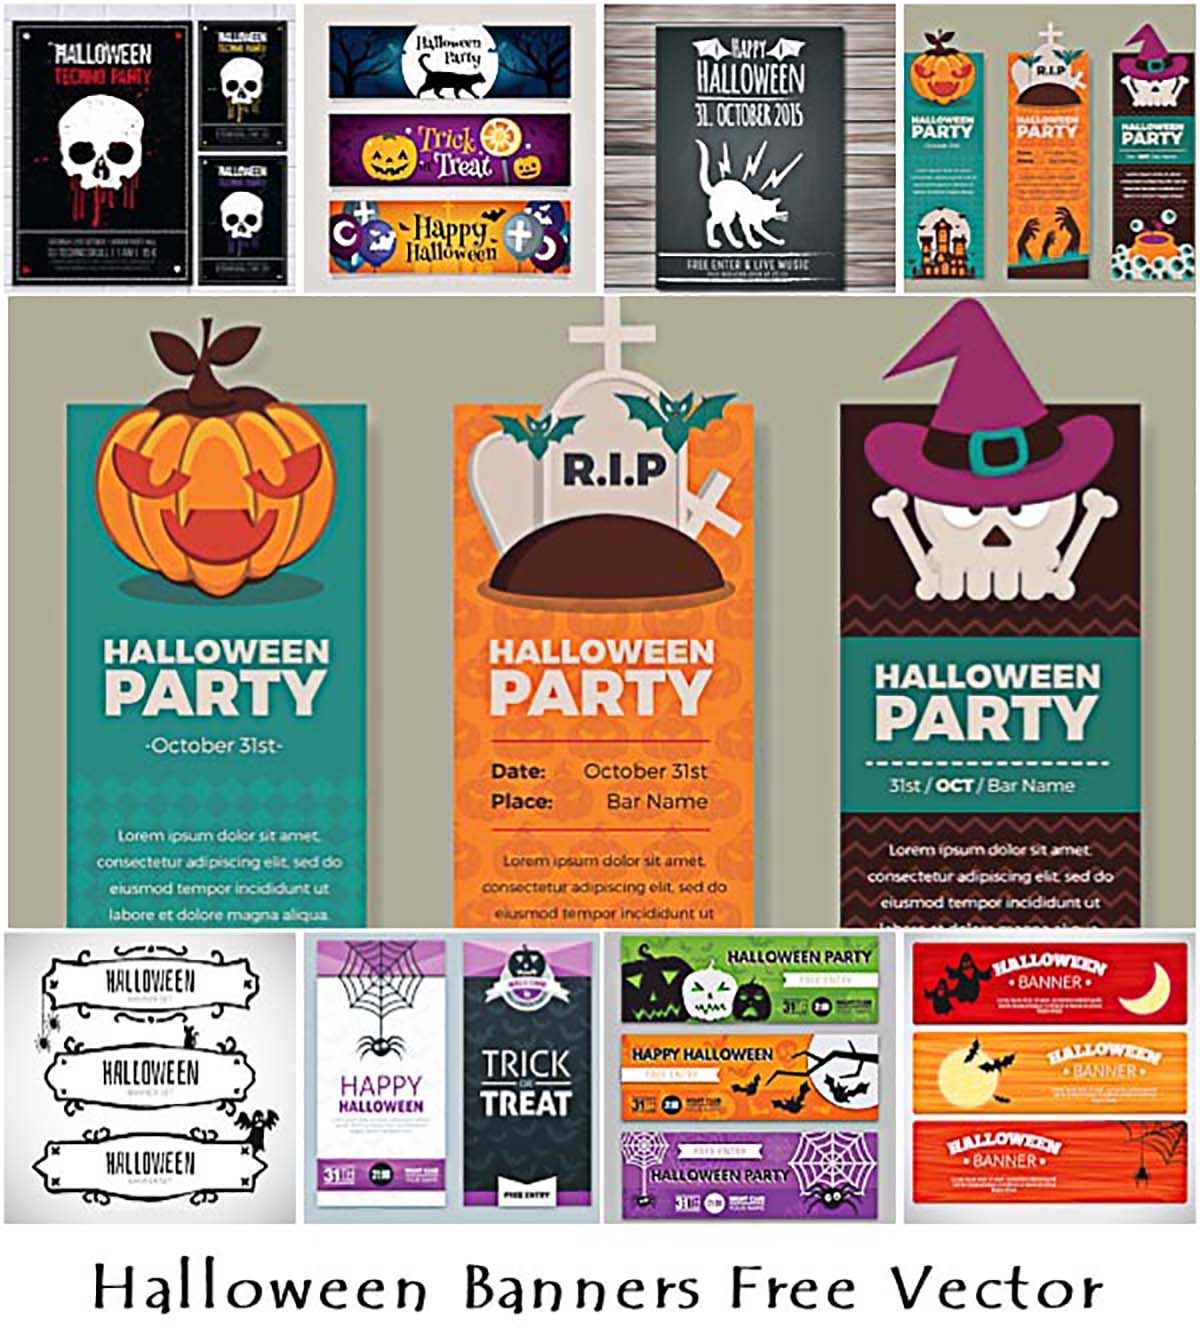 Colorful Halloween party vectors with pumpkins